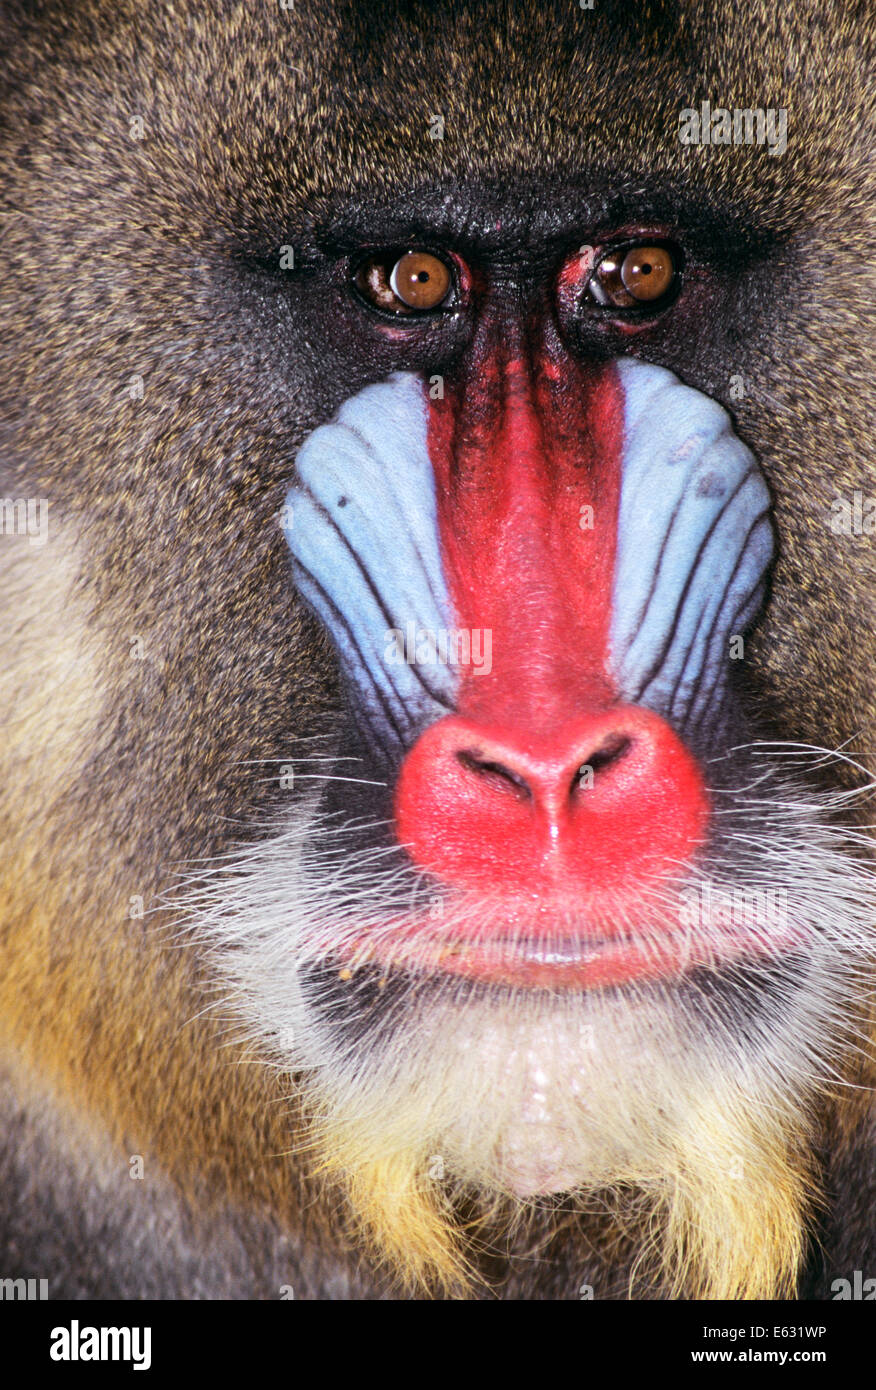 FACE OF MALE MANDRILL BABOON Mandrillus sphinx MOST COLORFUL PRIMATE LOOKING AT CAMERA Stock Photo